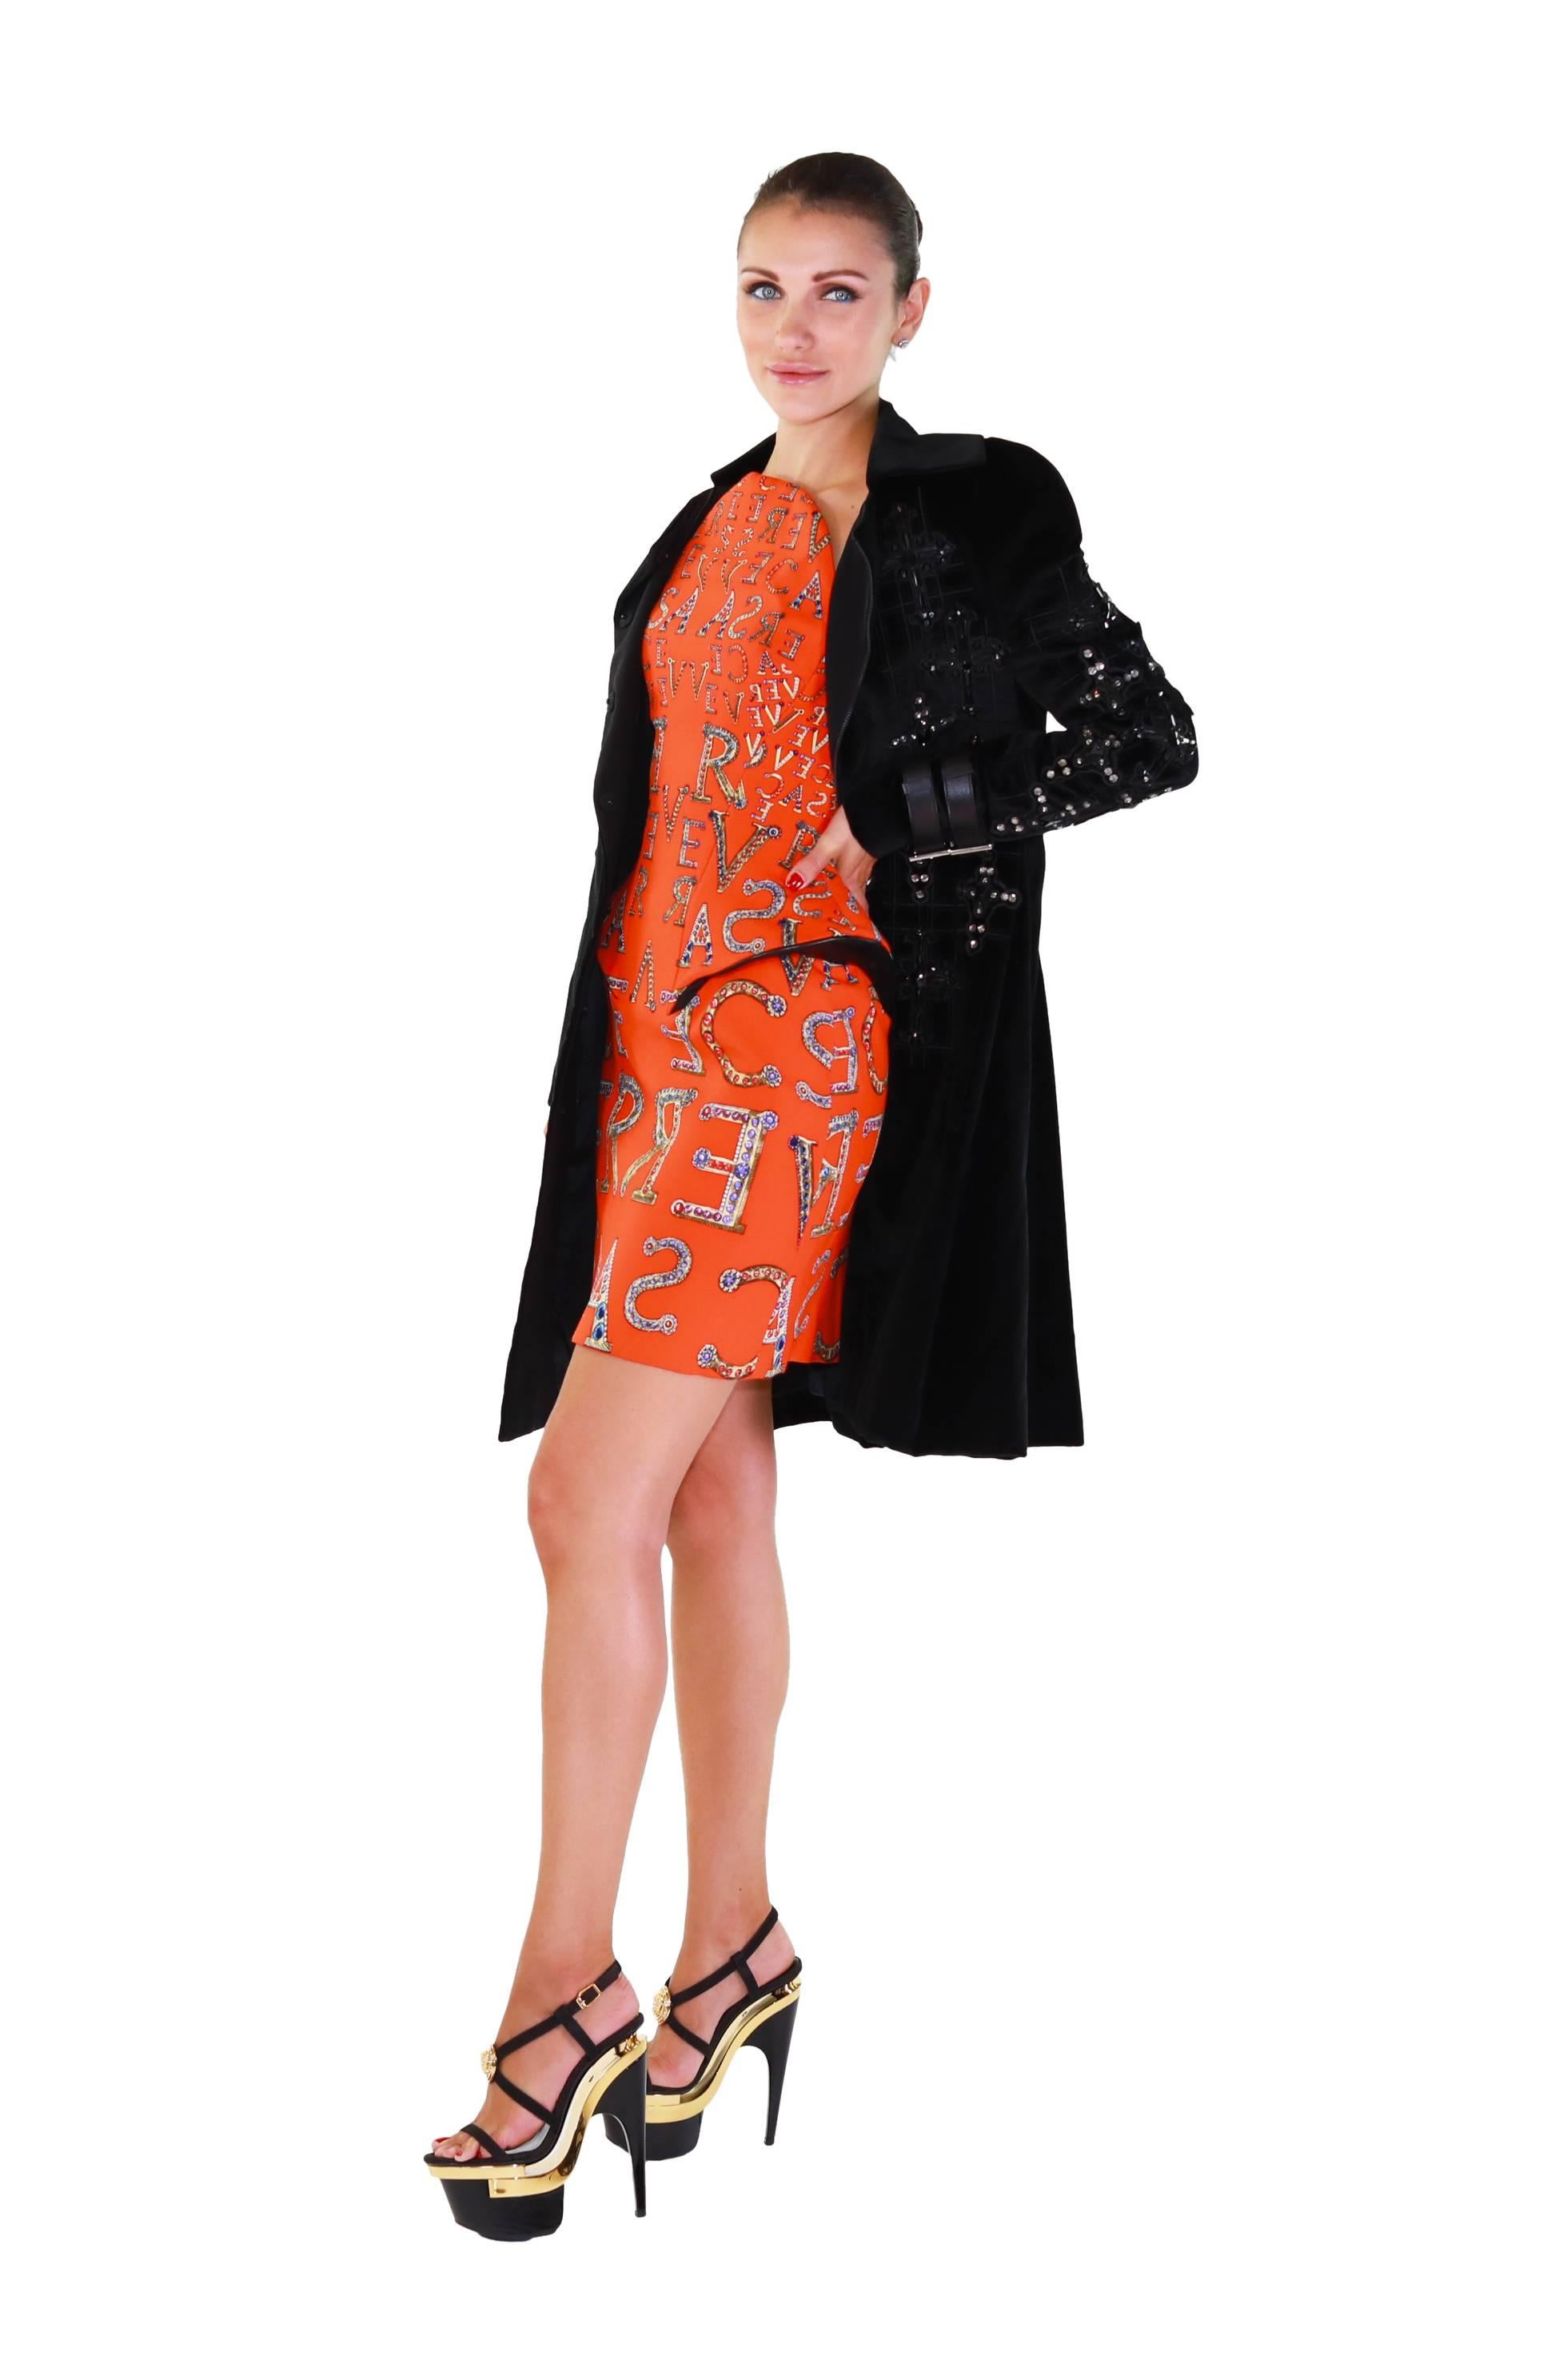 F/2012 look #26 NEW VERSACE STRUCTURED PRINTED ORANGE COCKTAIL DRESS 38 - 4 For Sale 6